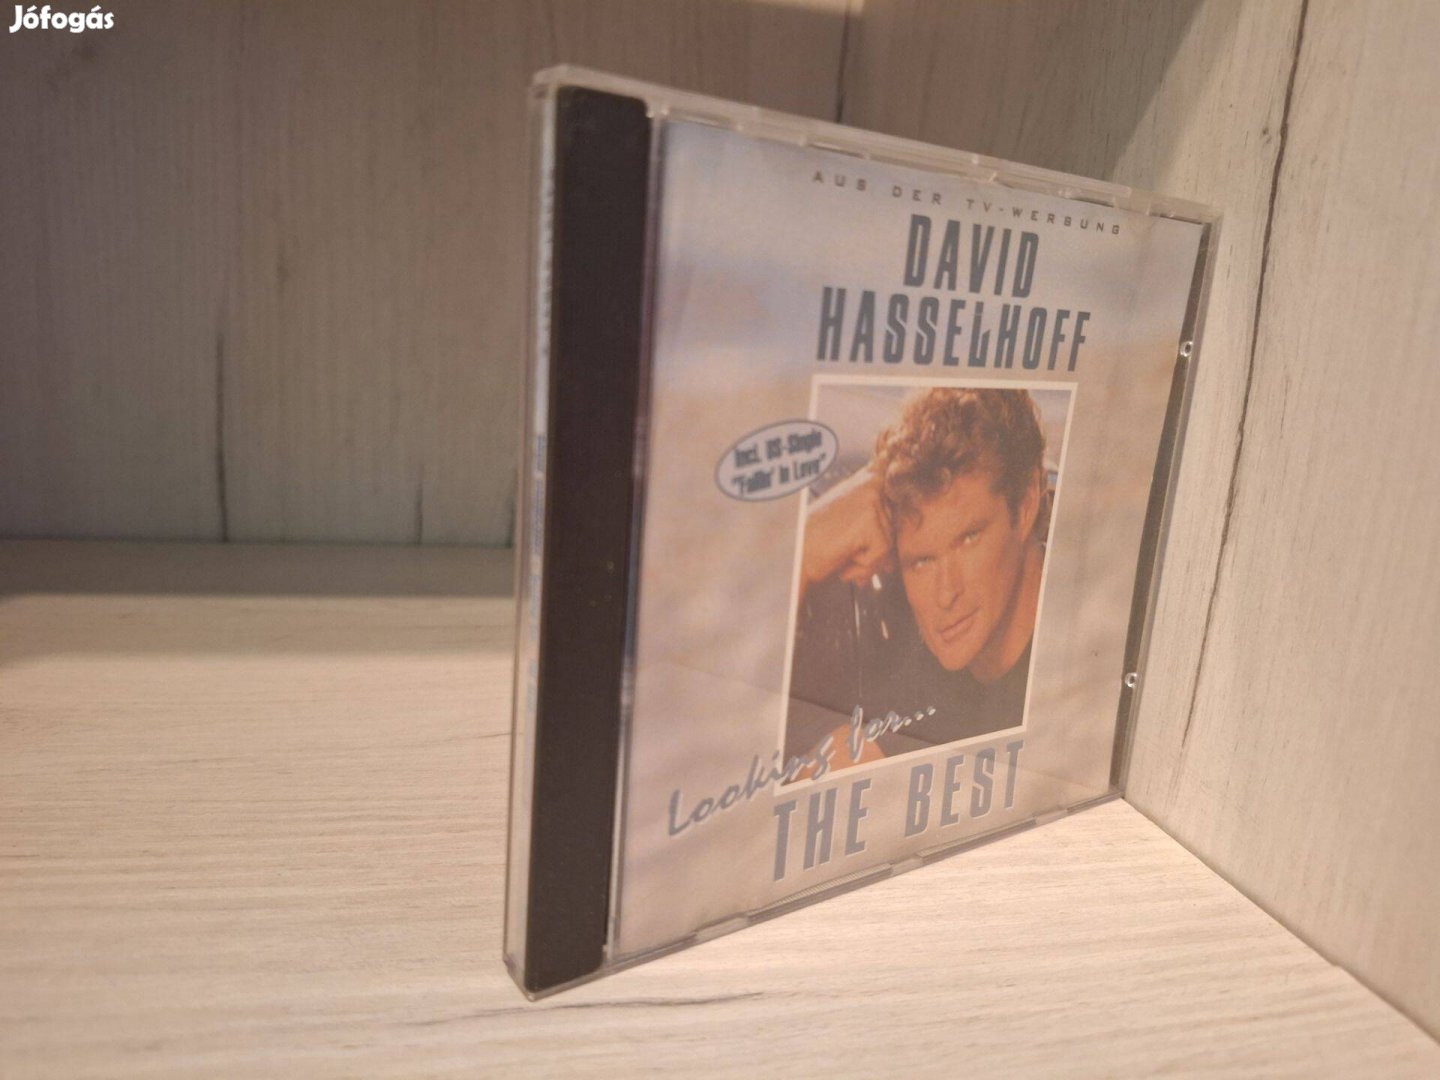 David Hasselhoff - Looking For . The Best CD